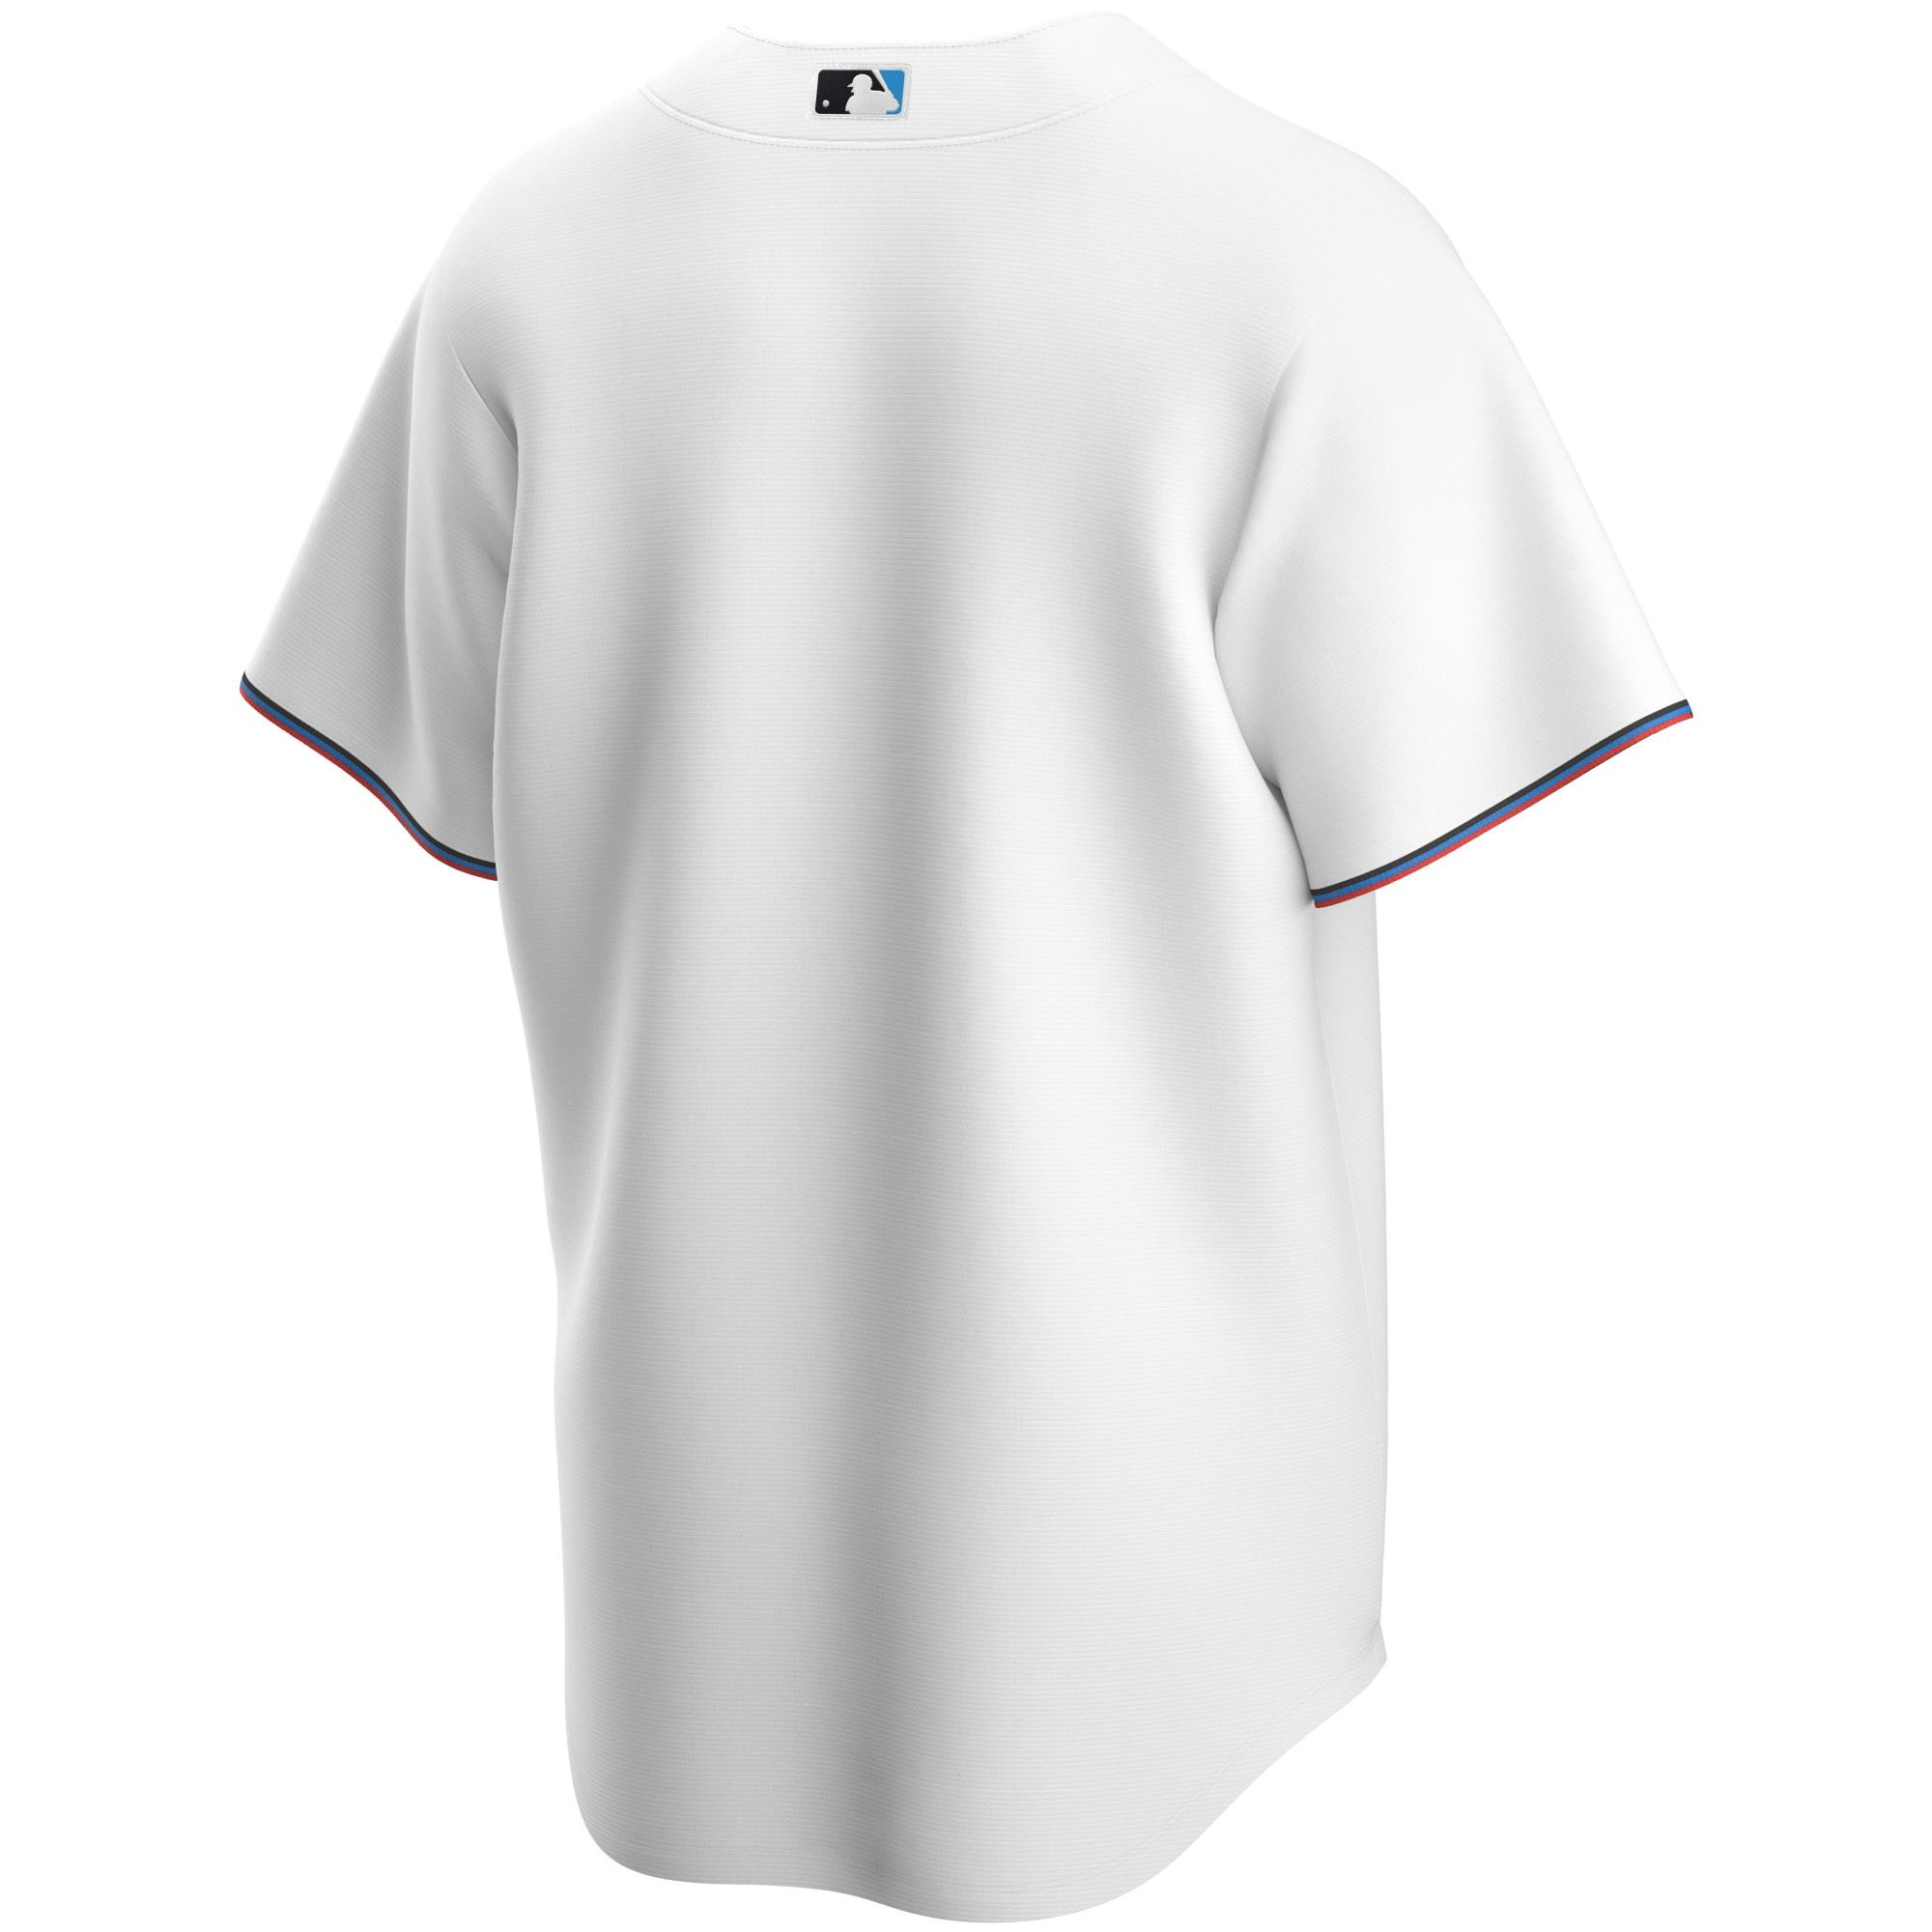 Miami Marlins Official MLB Replica Home Jersey White Nike